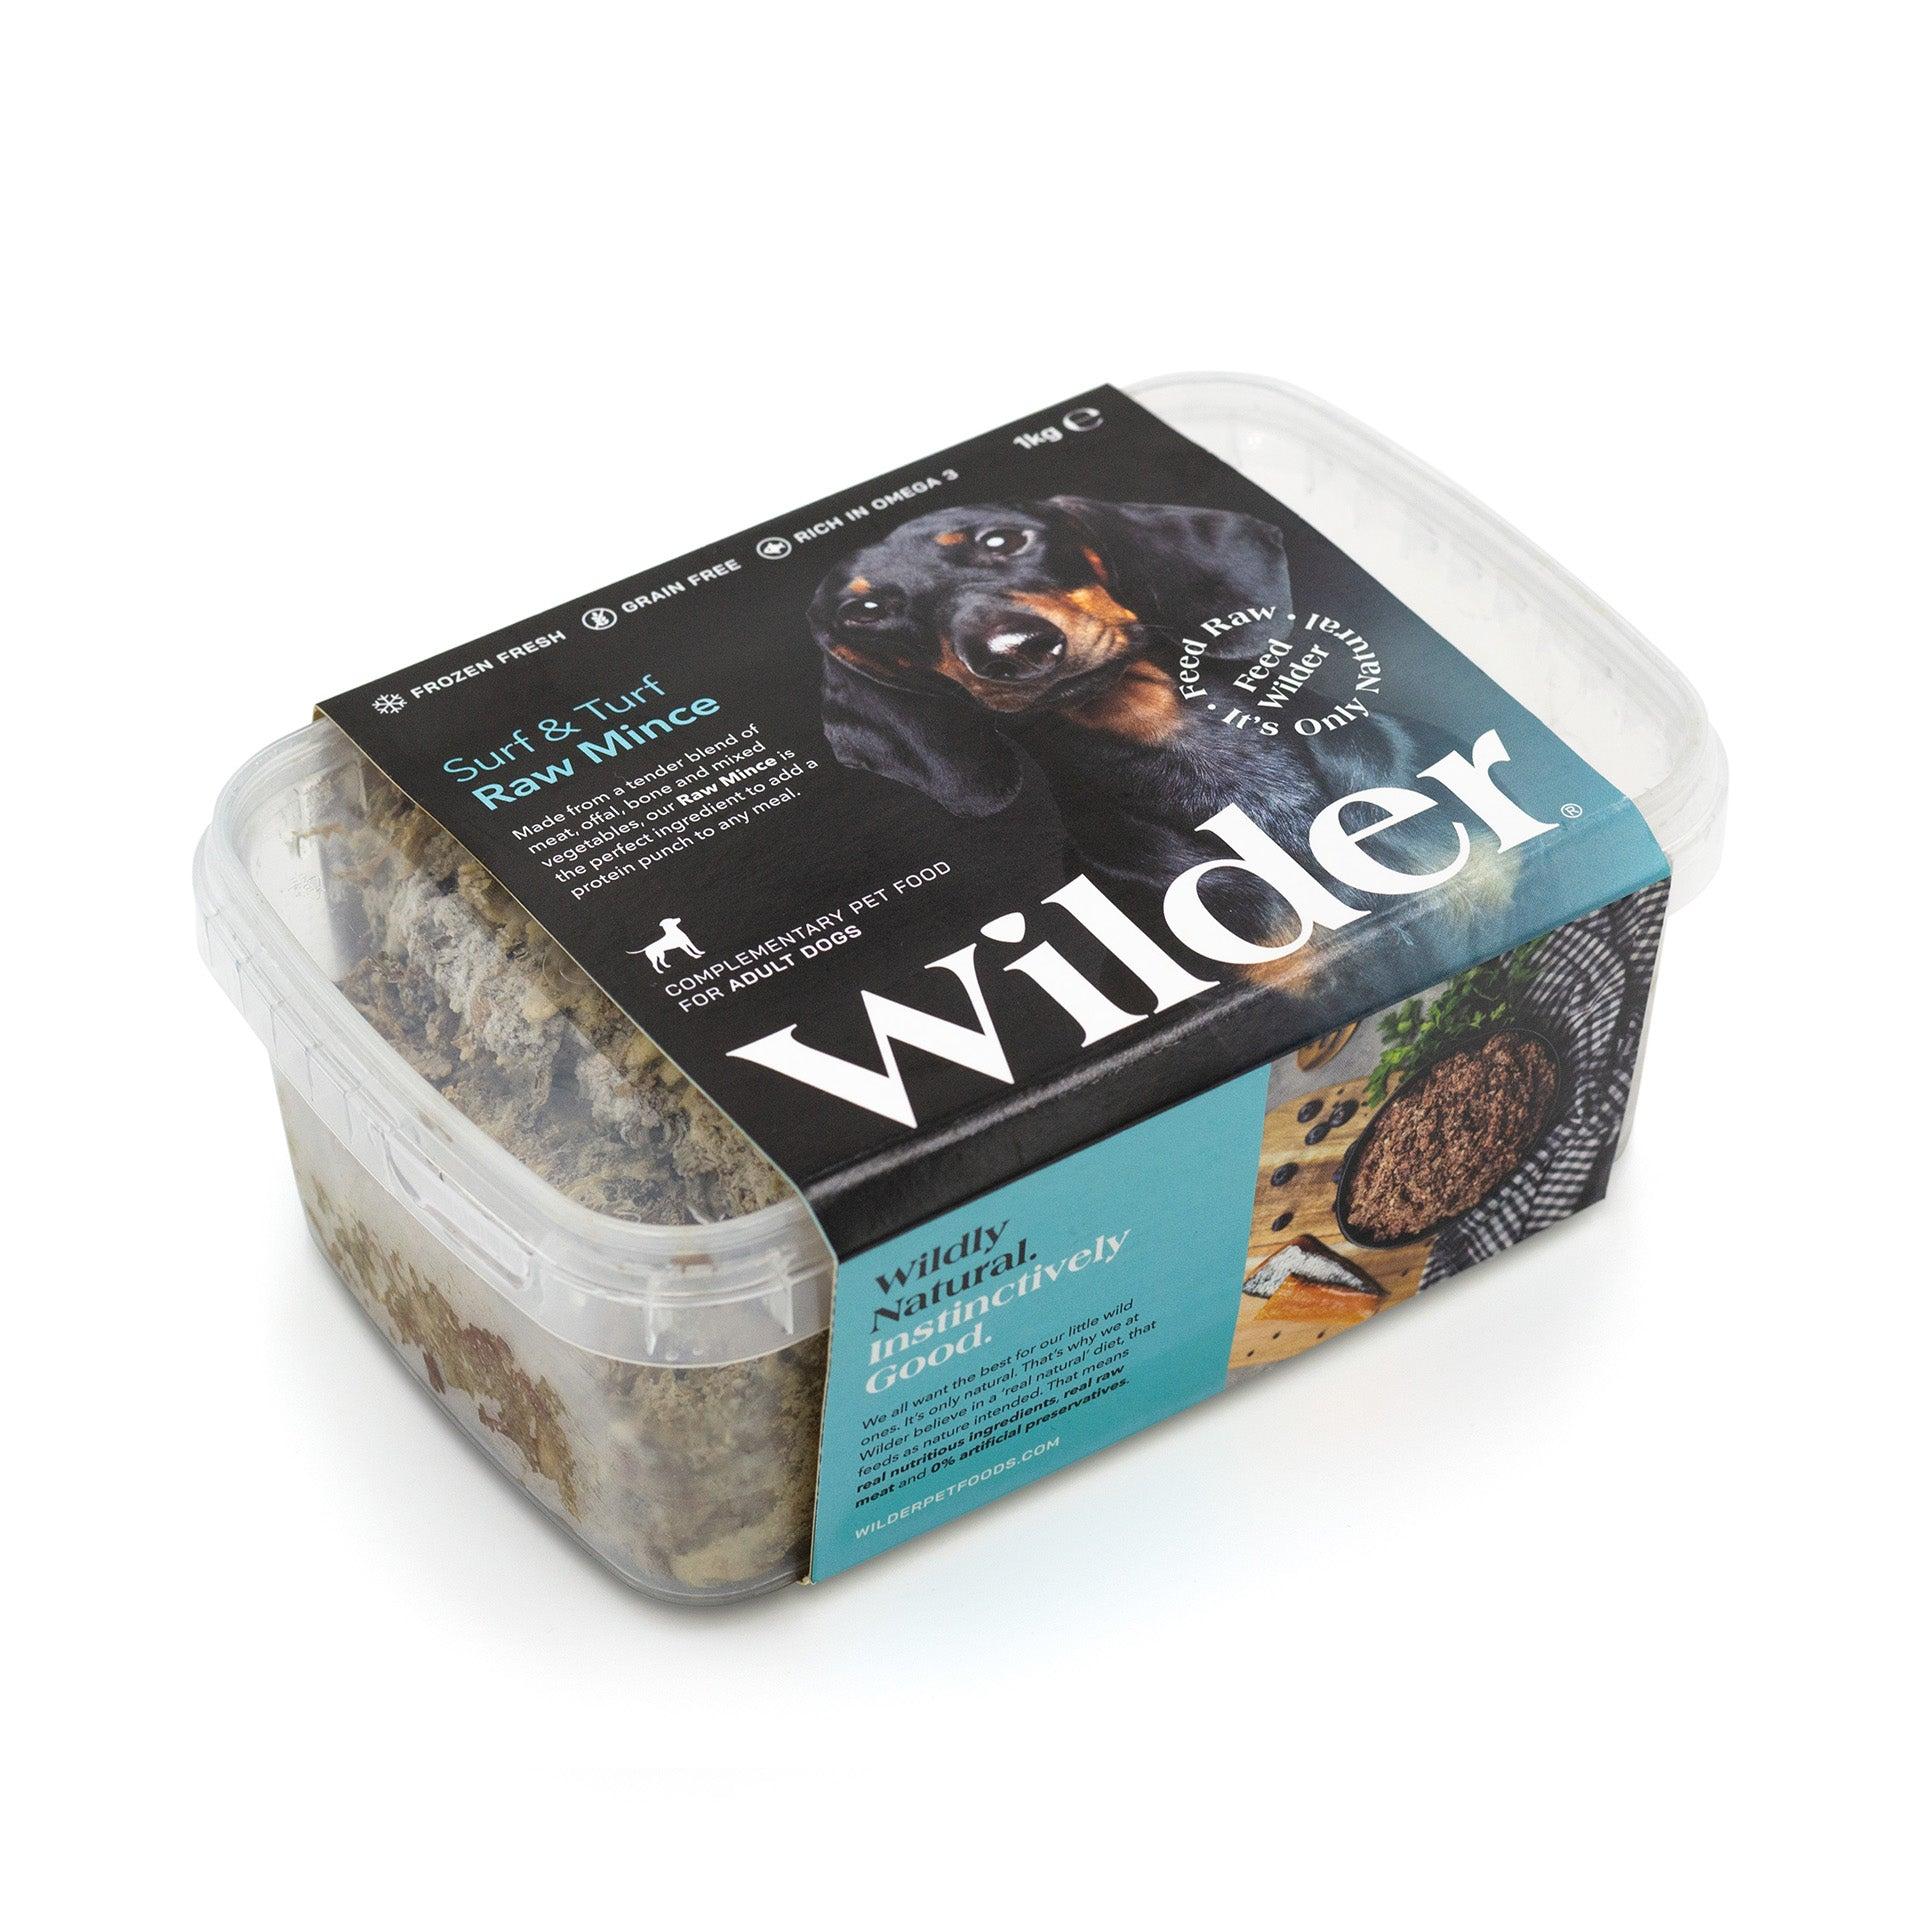 Wilder Surf and Turf Raw Mince 1kg Pack blue label fish recipe